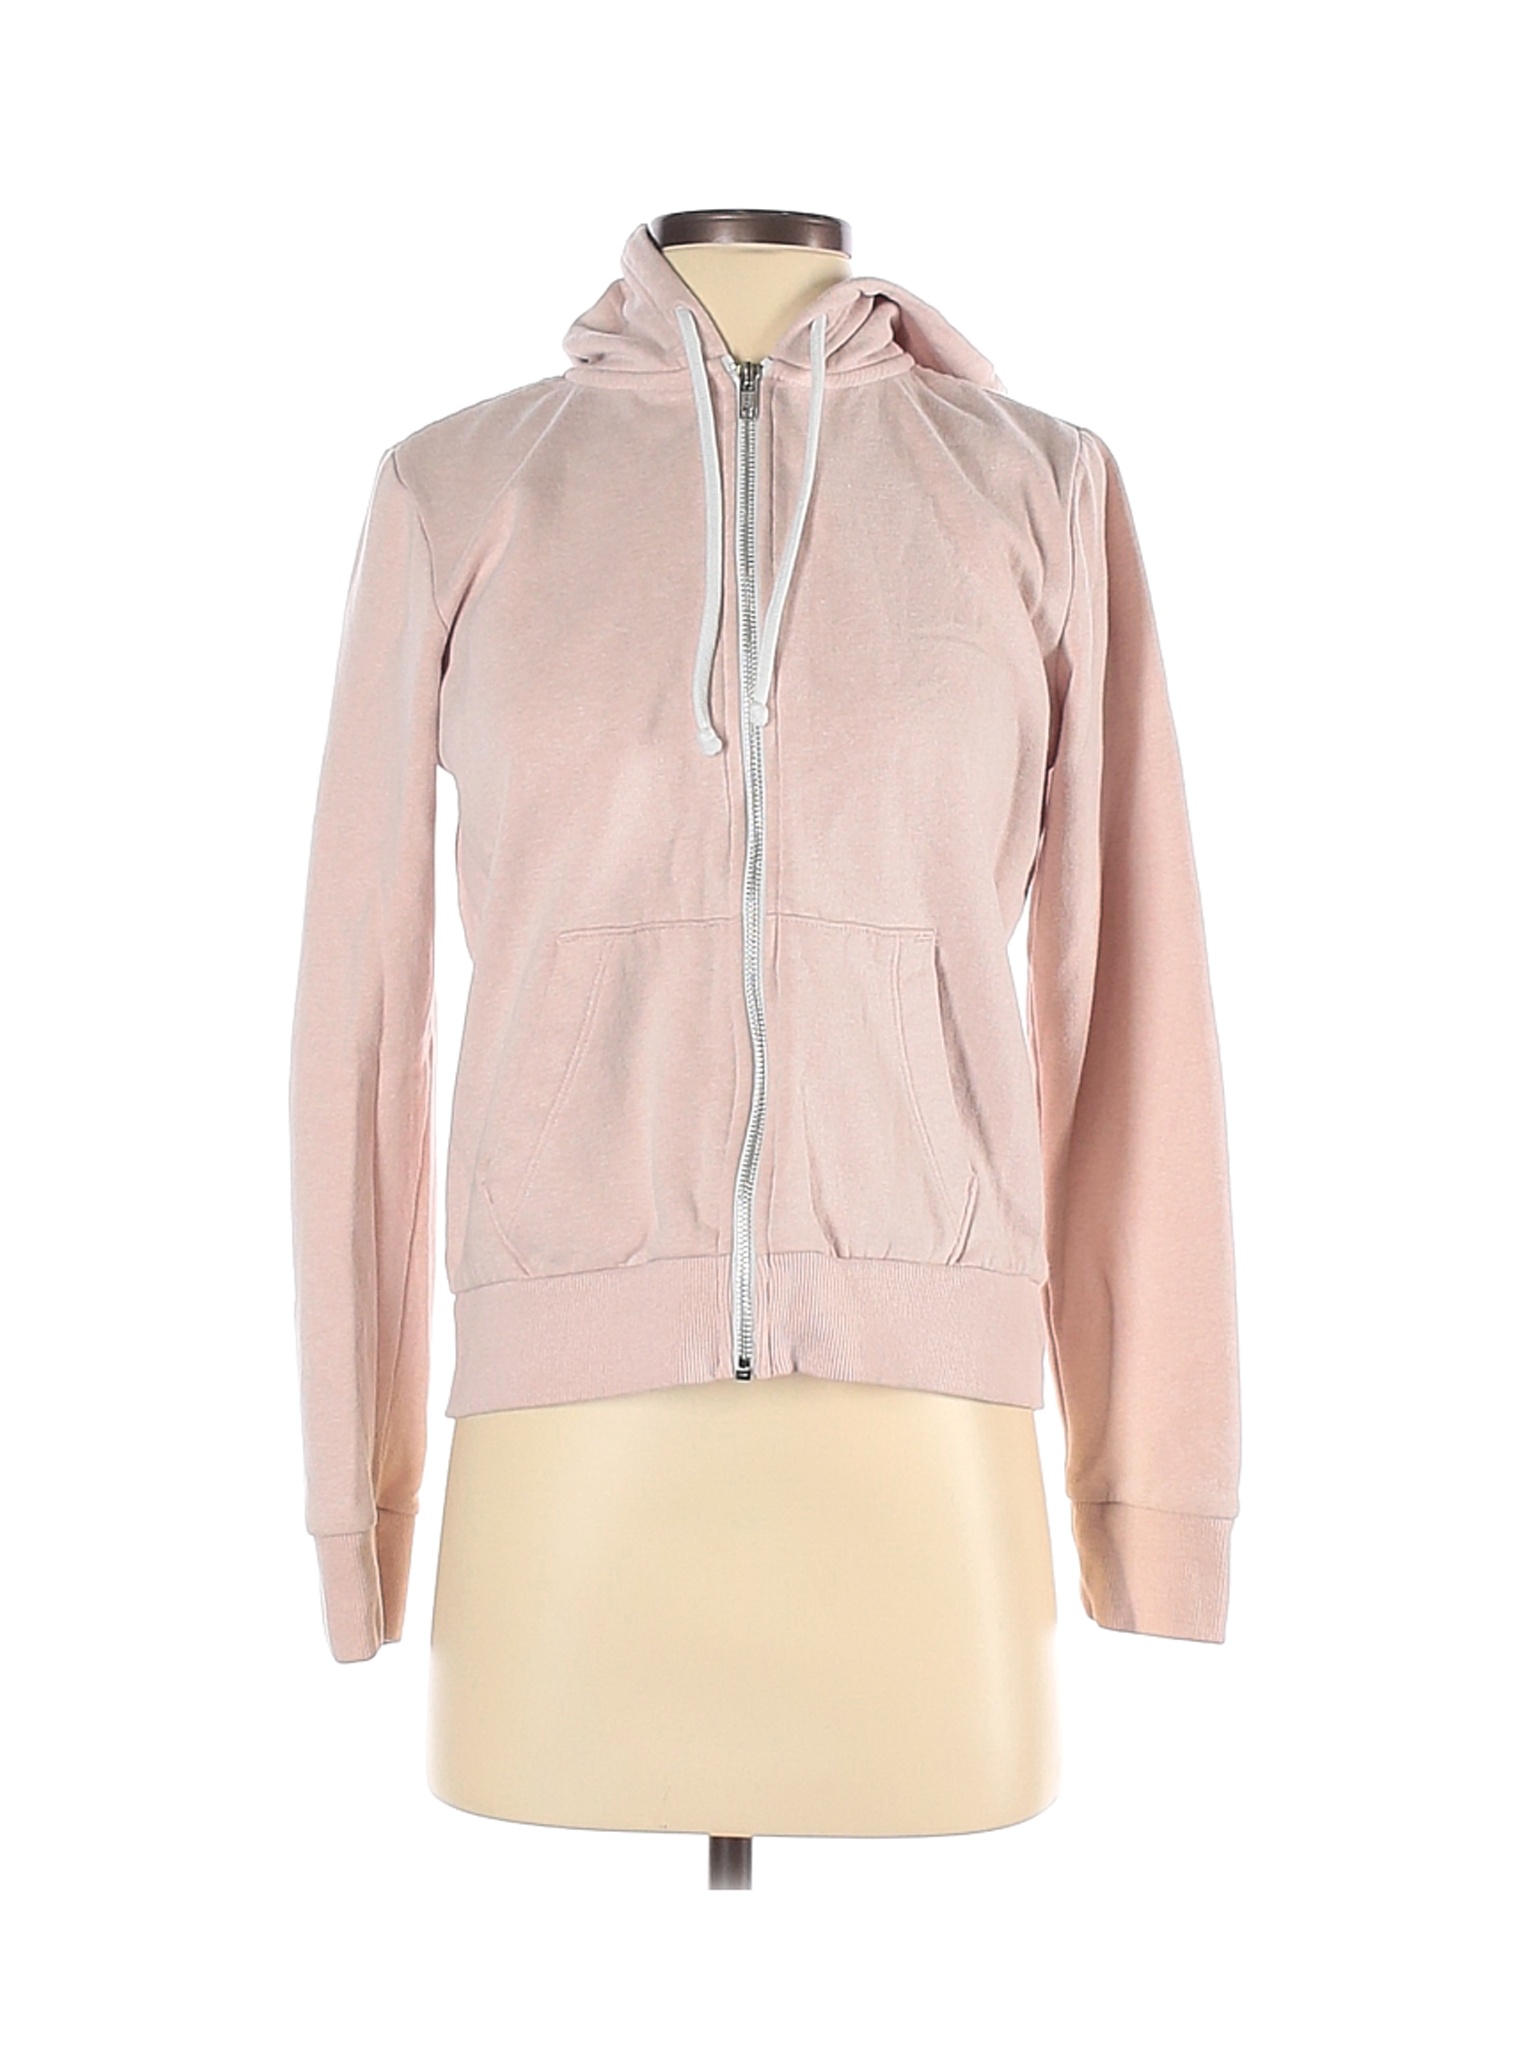 Divided by H&M Women Pink Zip Up Hoodie S | eBay